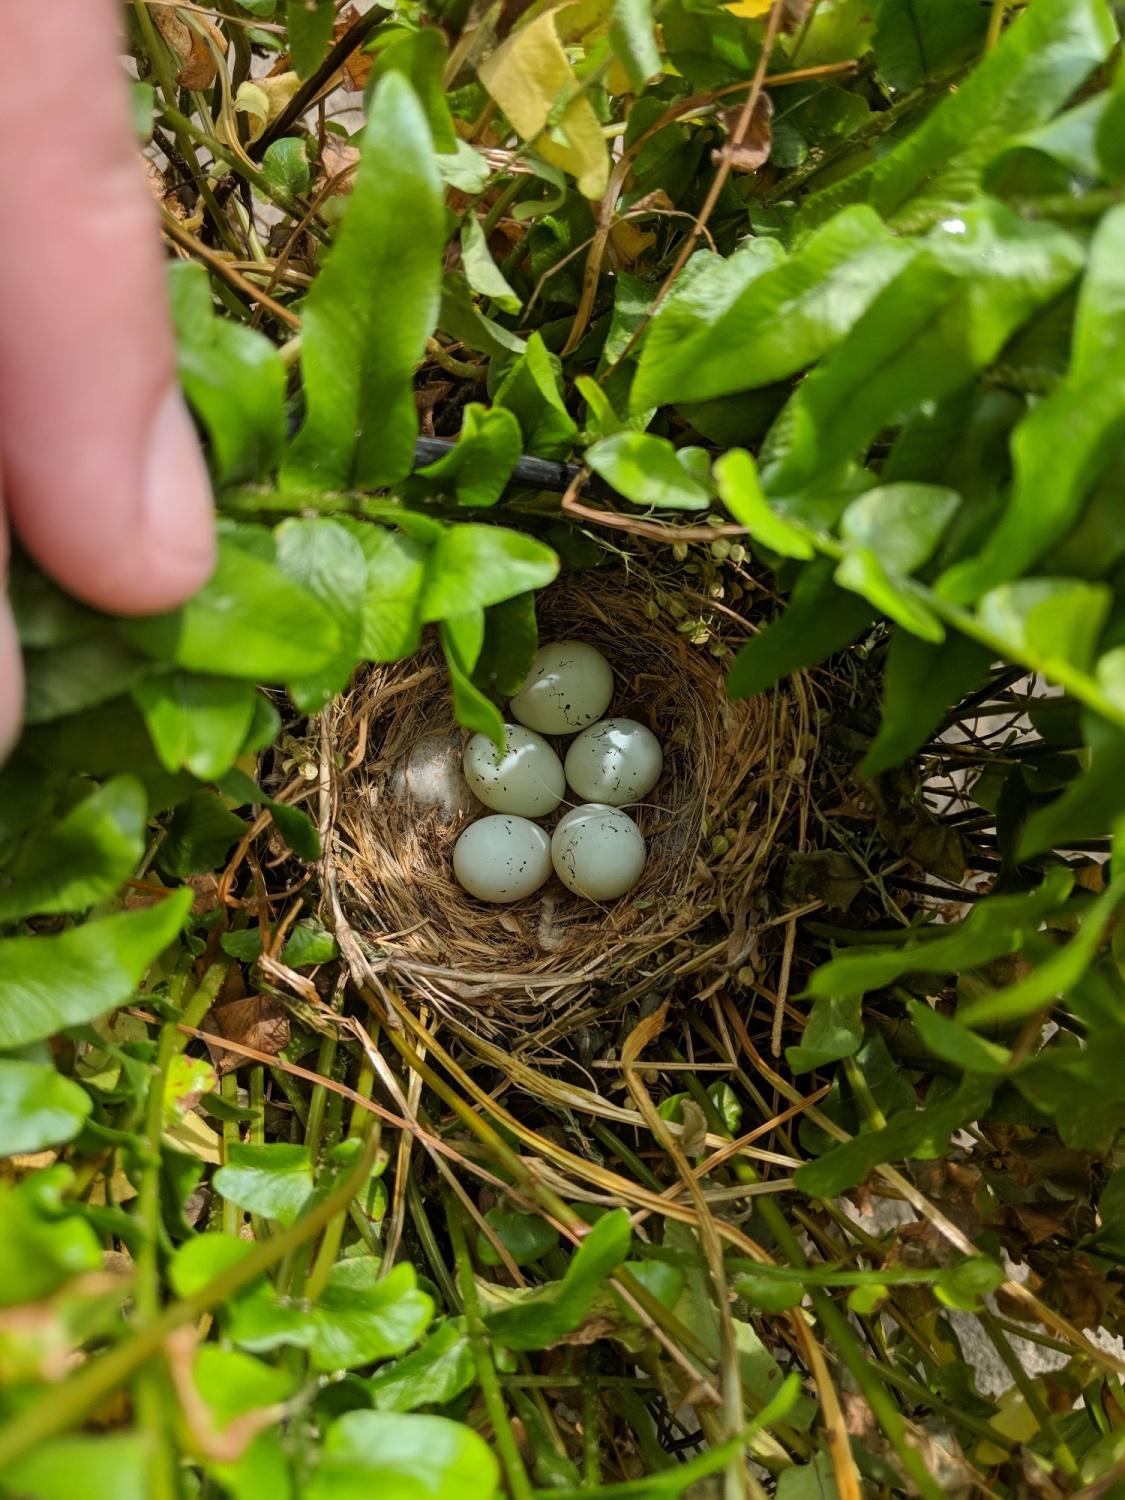 Darker Pigment in Bird Eggs Plays Important Role in Thermoregulation